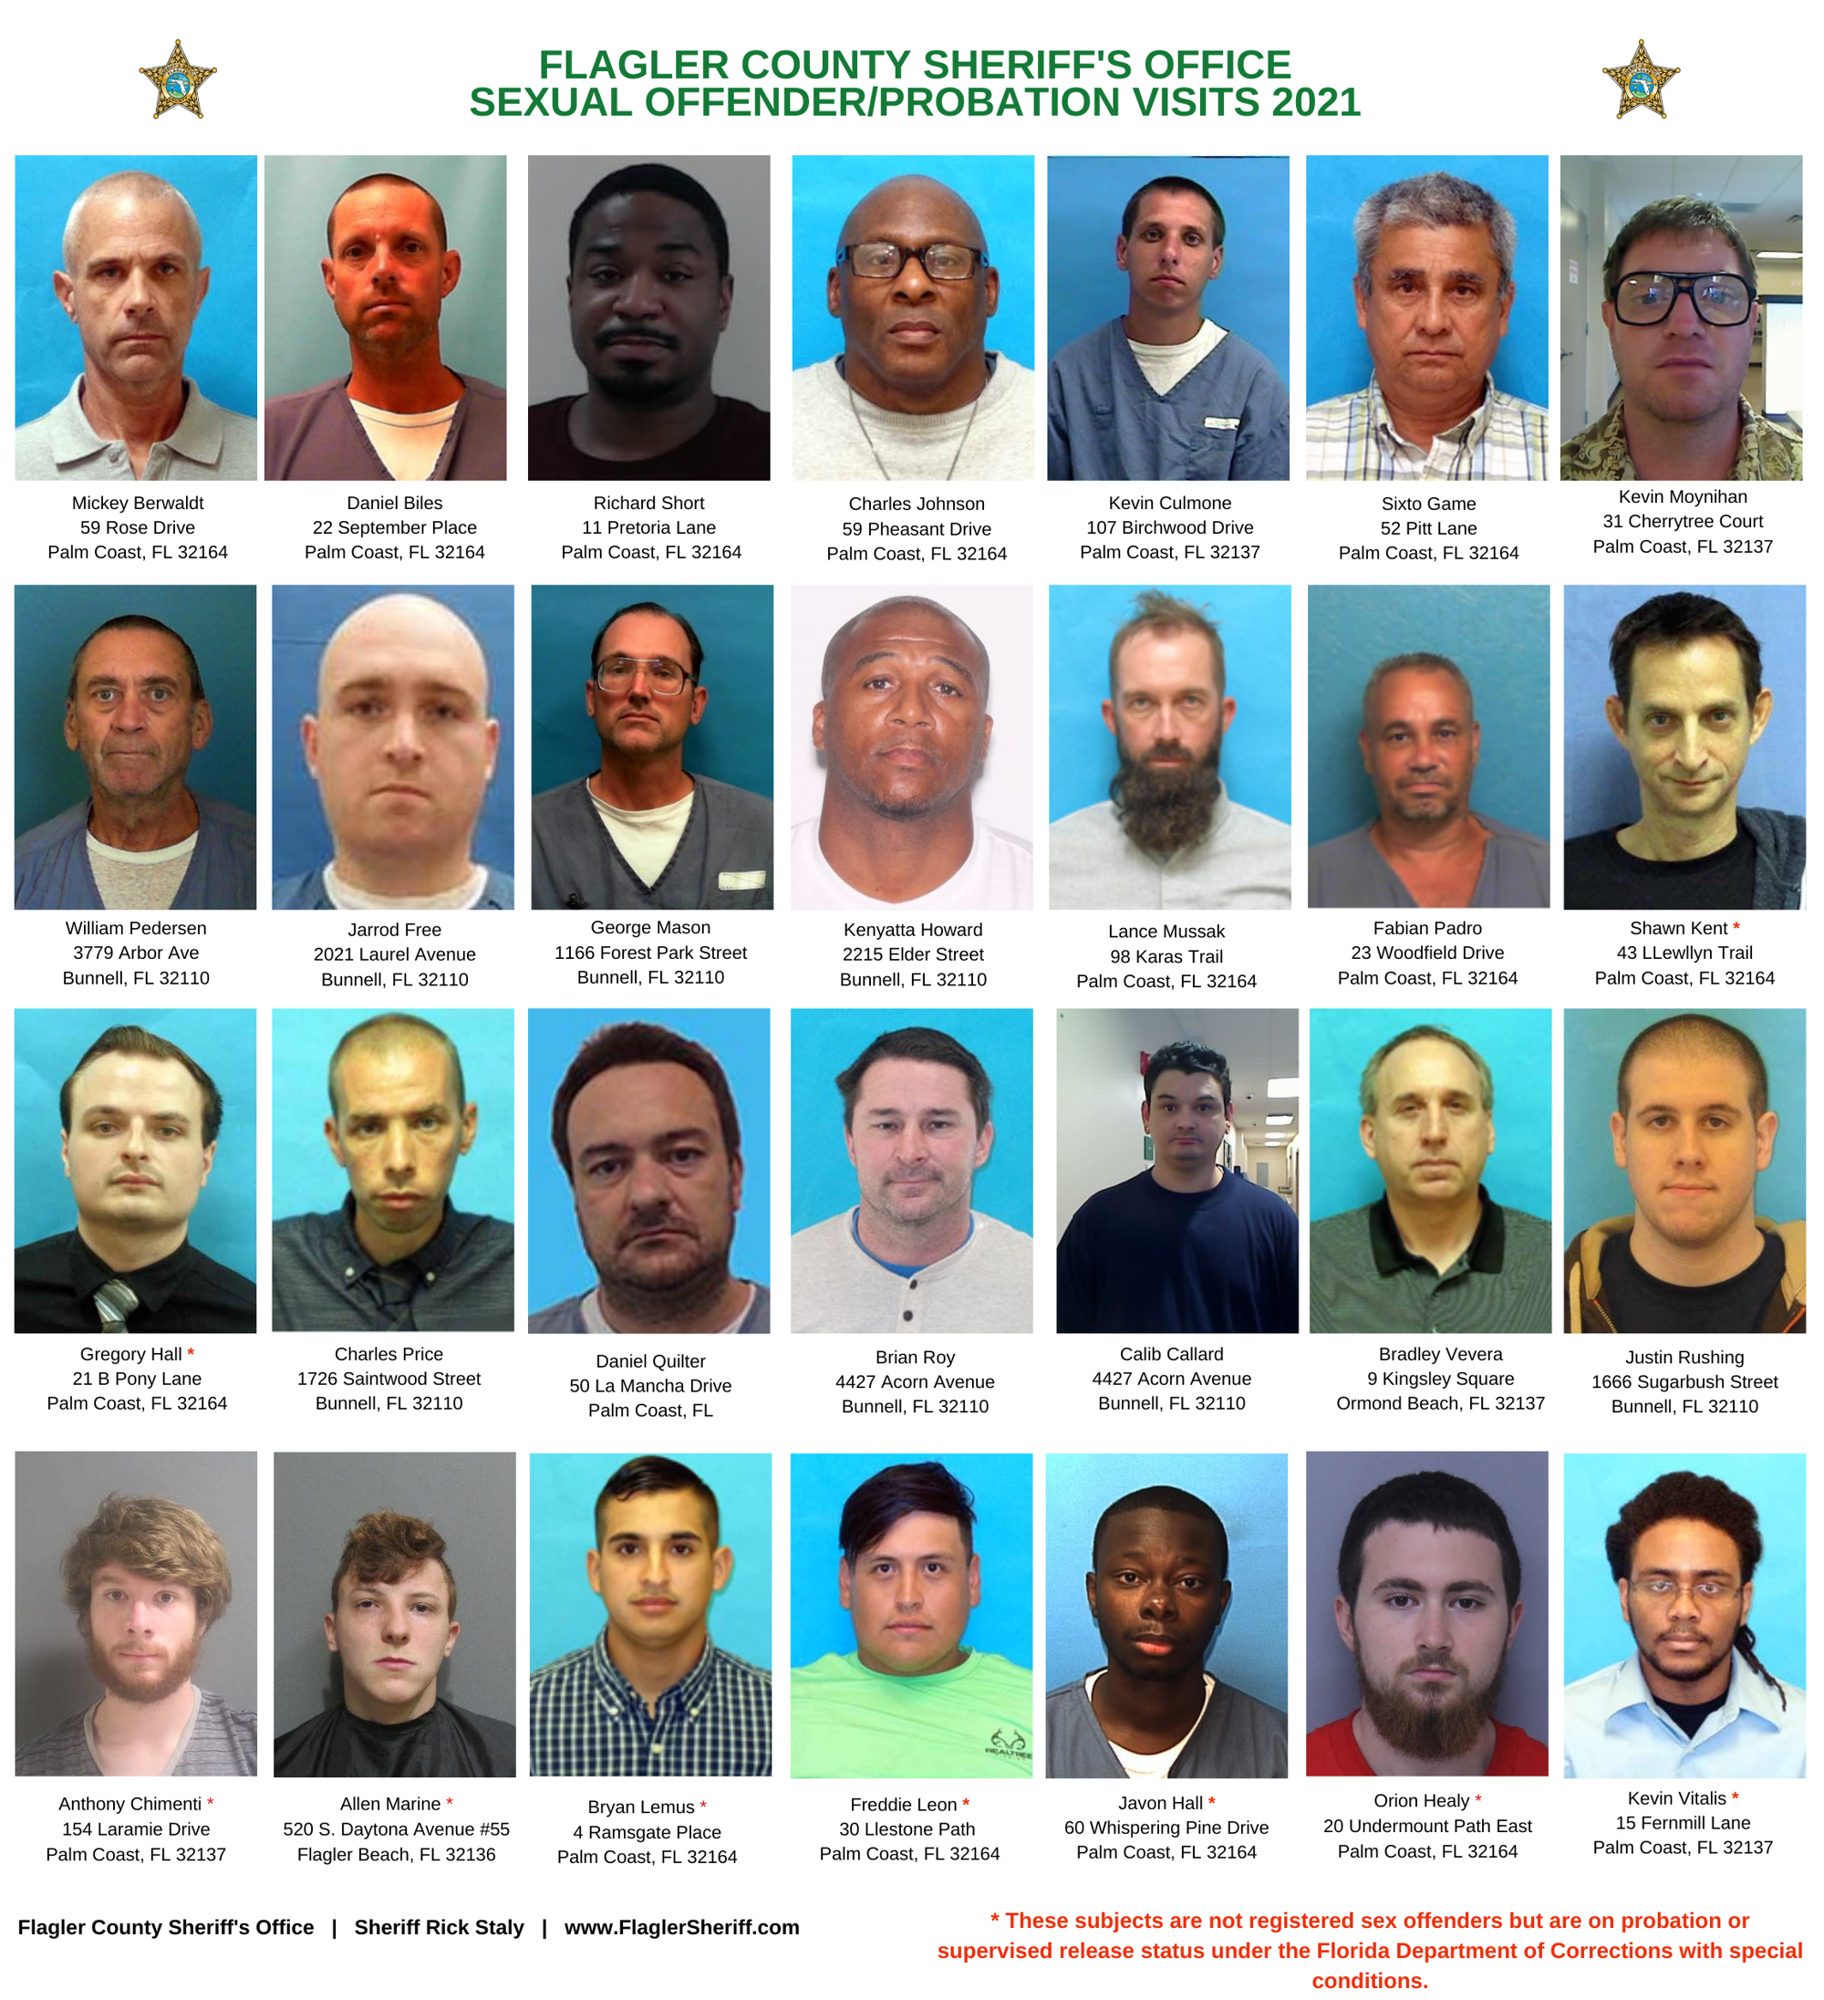 The 29 offenders that will be visited on Halloween day. Included are their photographs, names, and addresses. Courtesy of FCSO